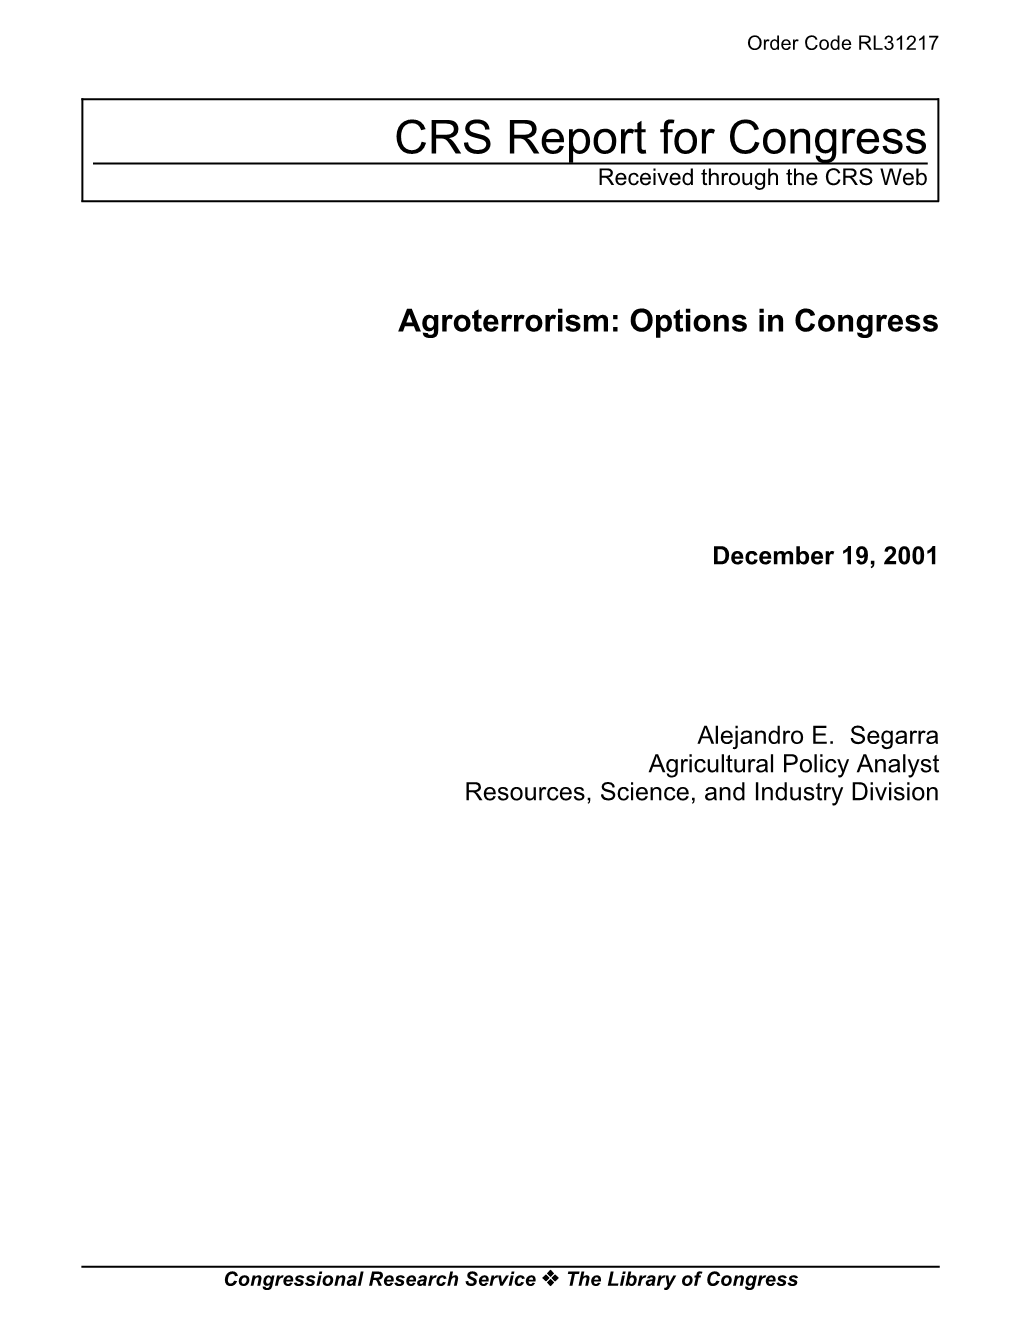 Agroterrorism: Options in Congress